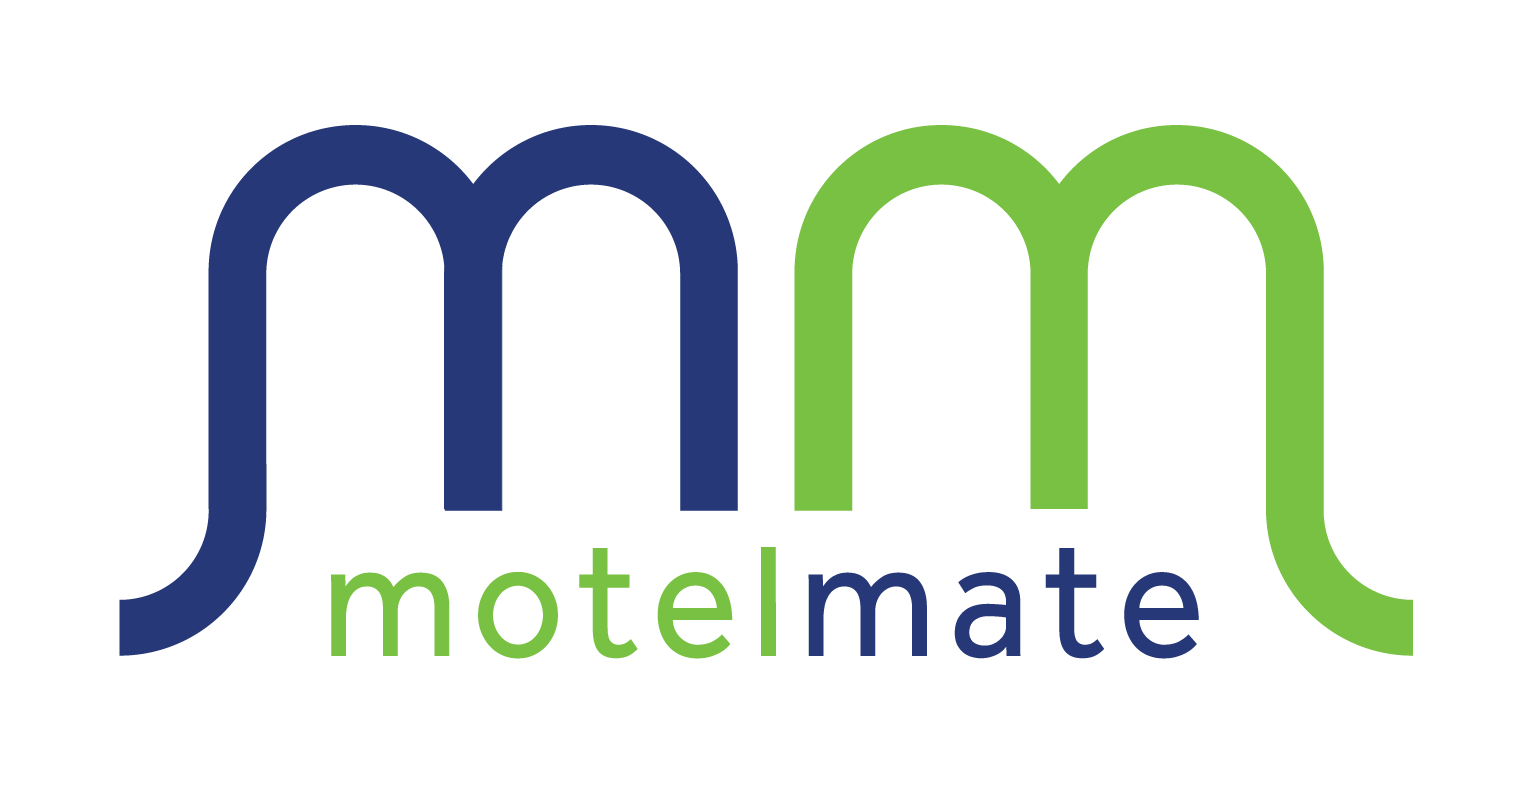 MotelMate Logo (full) - MotelMate is a market leading reservation management software for your hotel, motel, holiday park or managed units. Seamlessly manage your reservations with easy-to-use, affordable accommodation booking software.